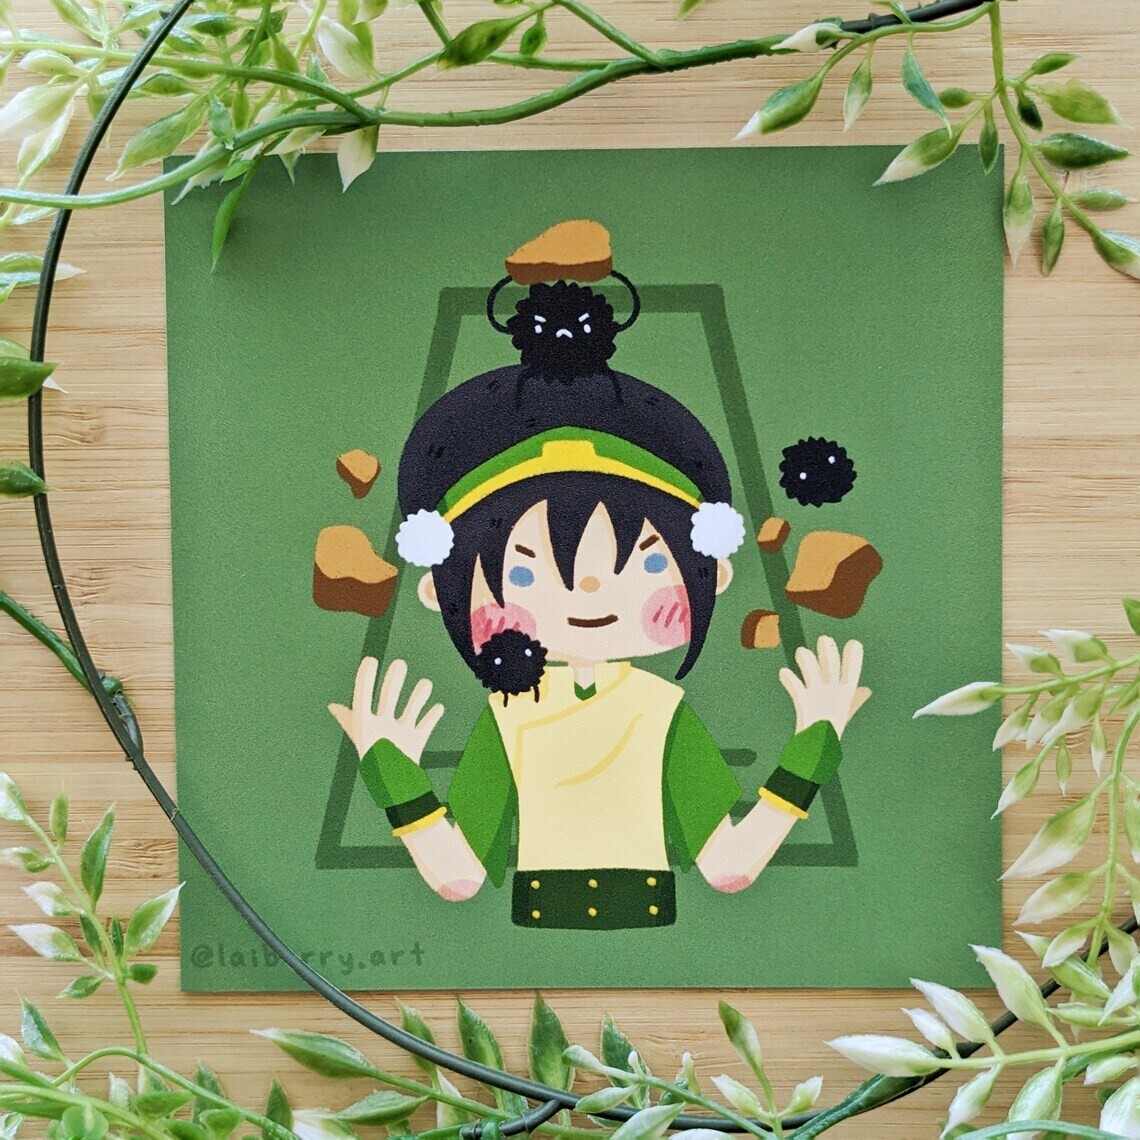 Toph and Soot Sprites Art Print